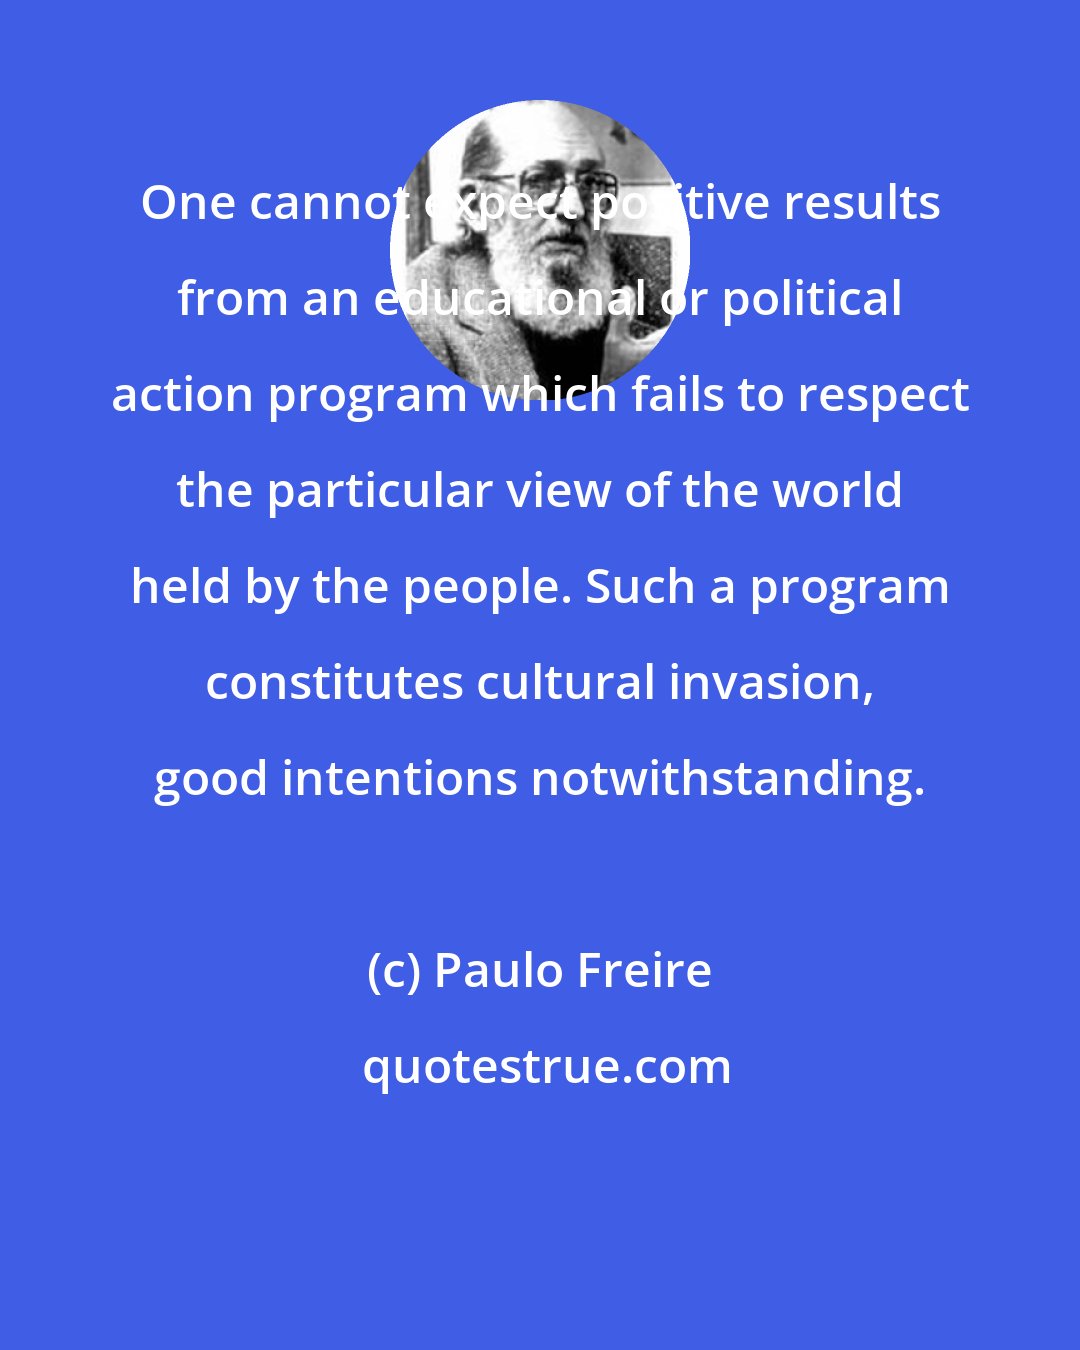 Paulo Freire: One cannot expect positive results from an educational or political action program which fails to respect the particular view of the world held by the people. Such a program constitutes cultural invasion, good intentions notwithstanding.